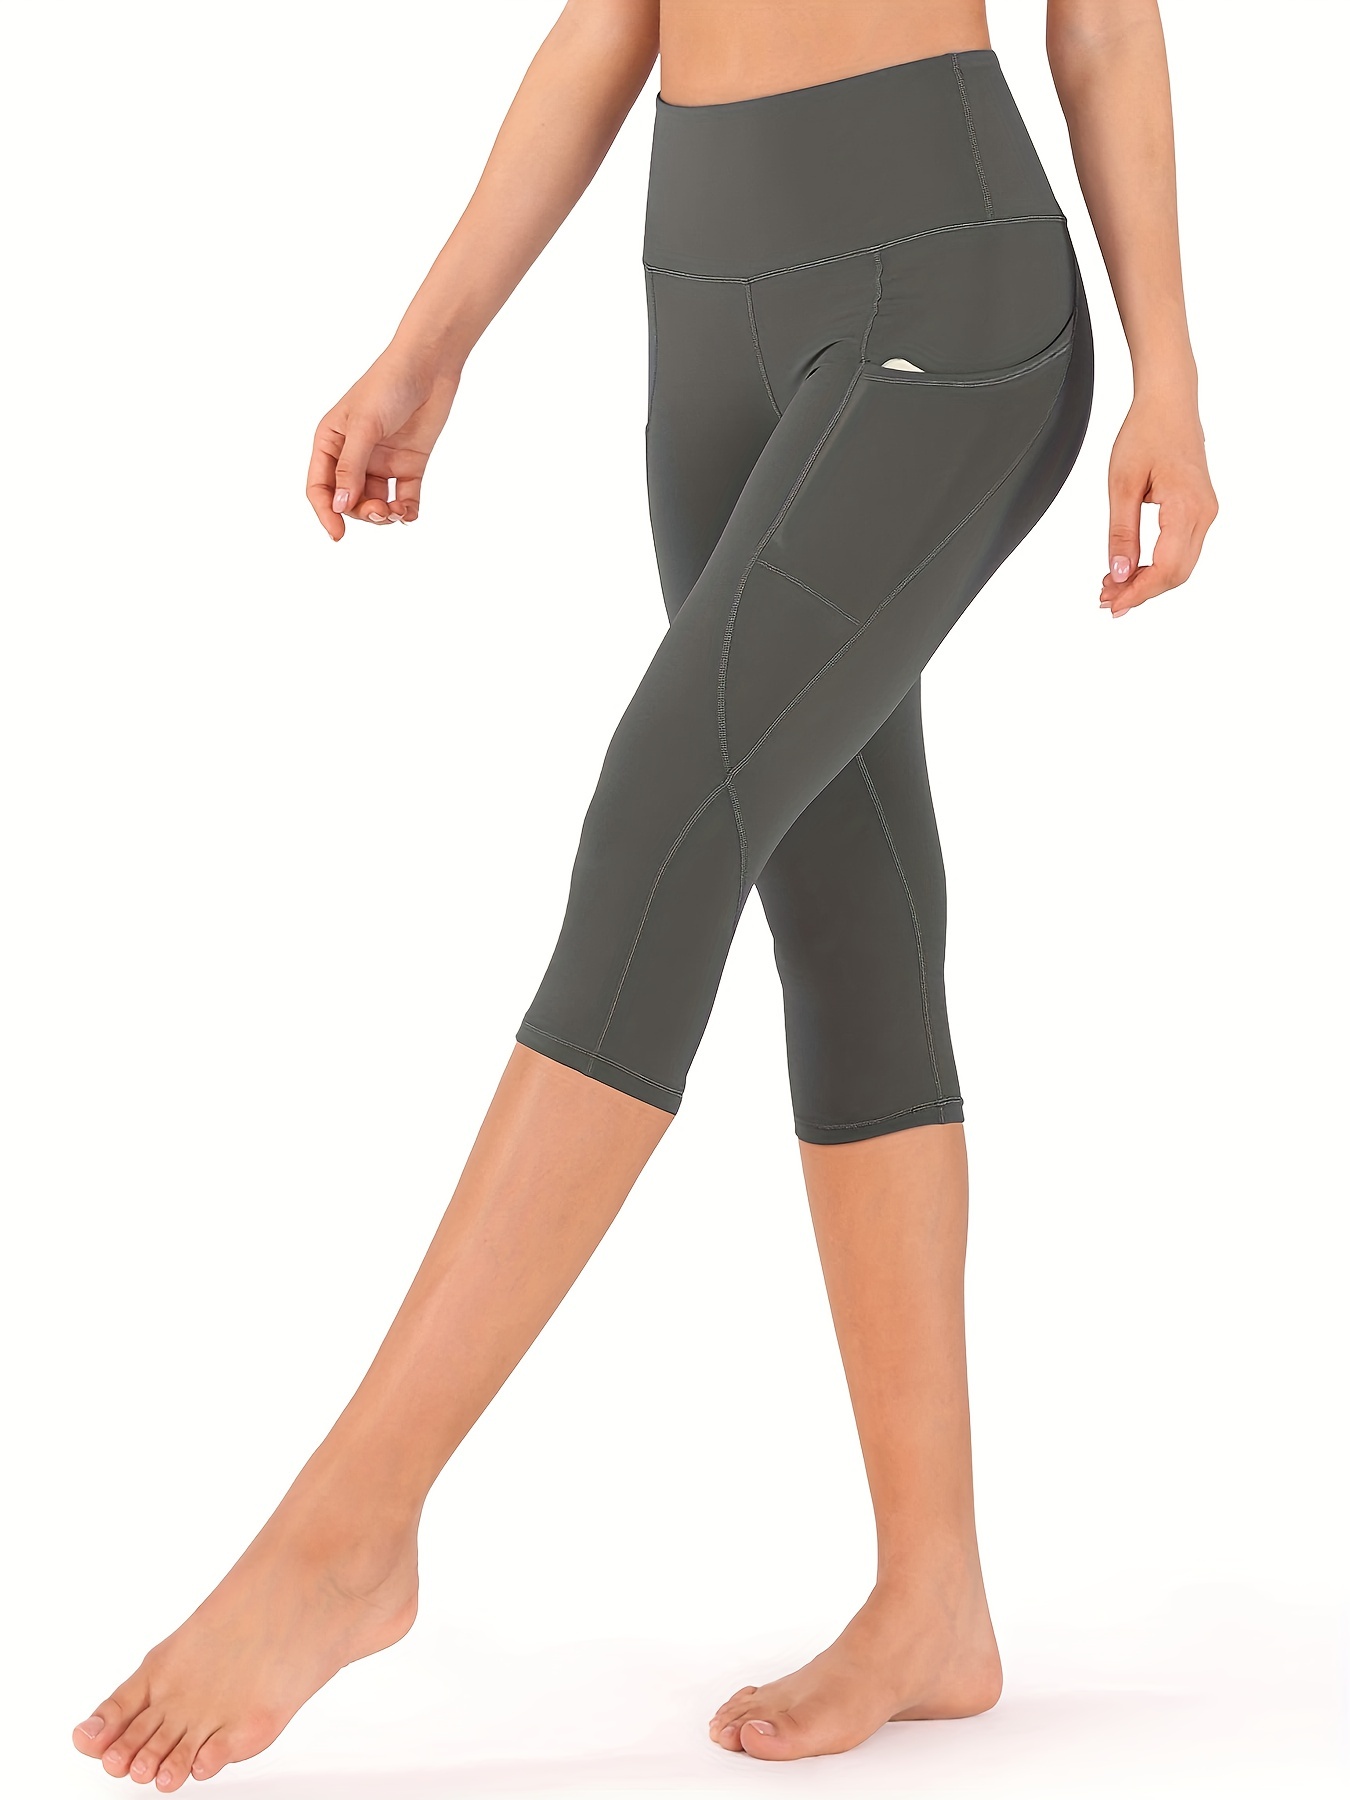 Buy Women's High Waisted Reflective Yoga Pants with Pockets: Full